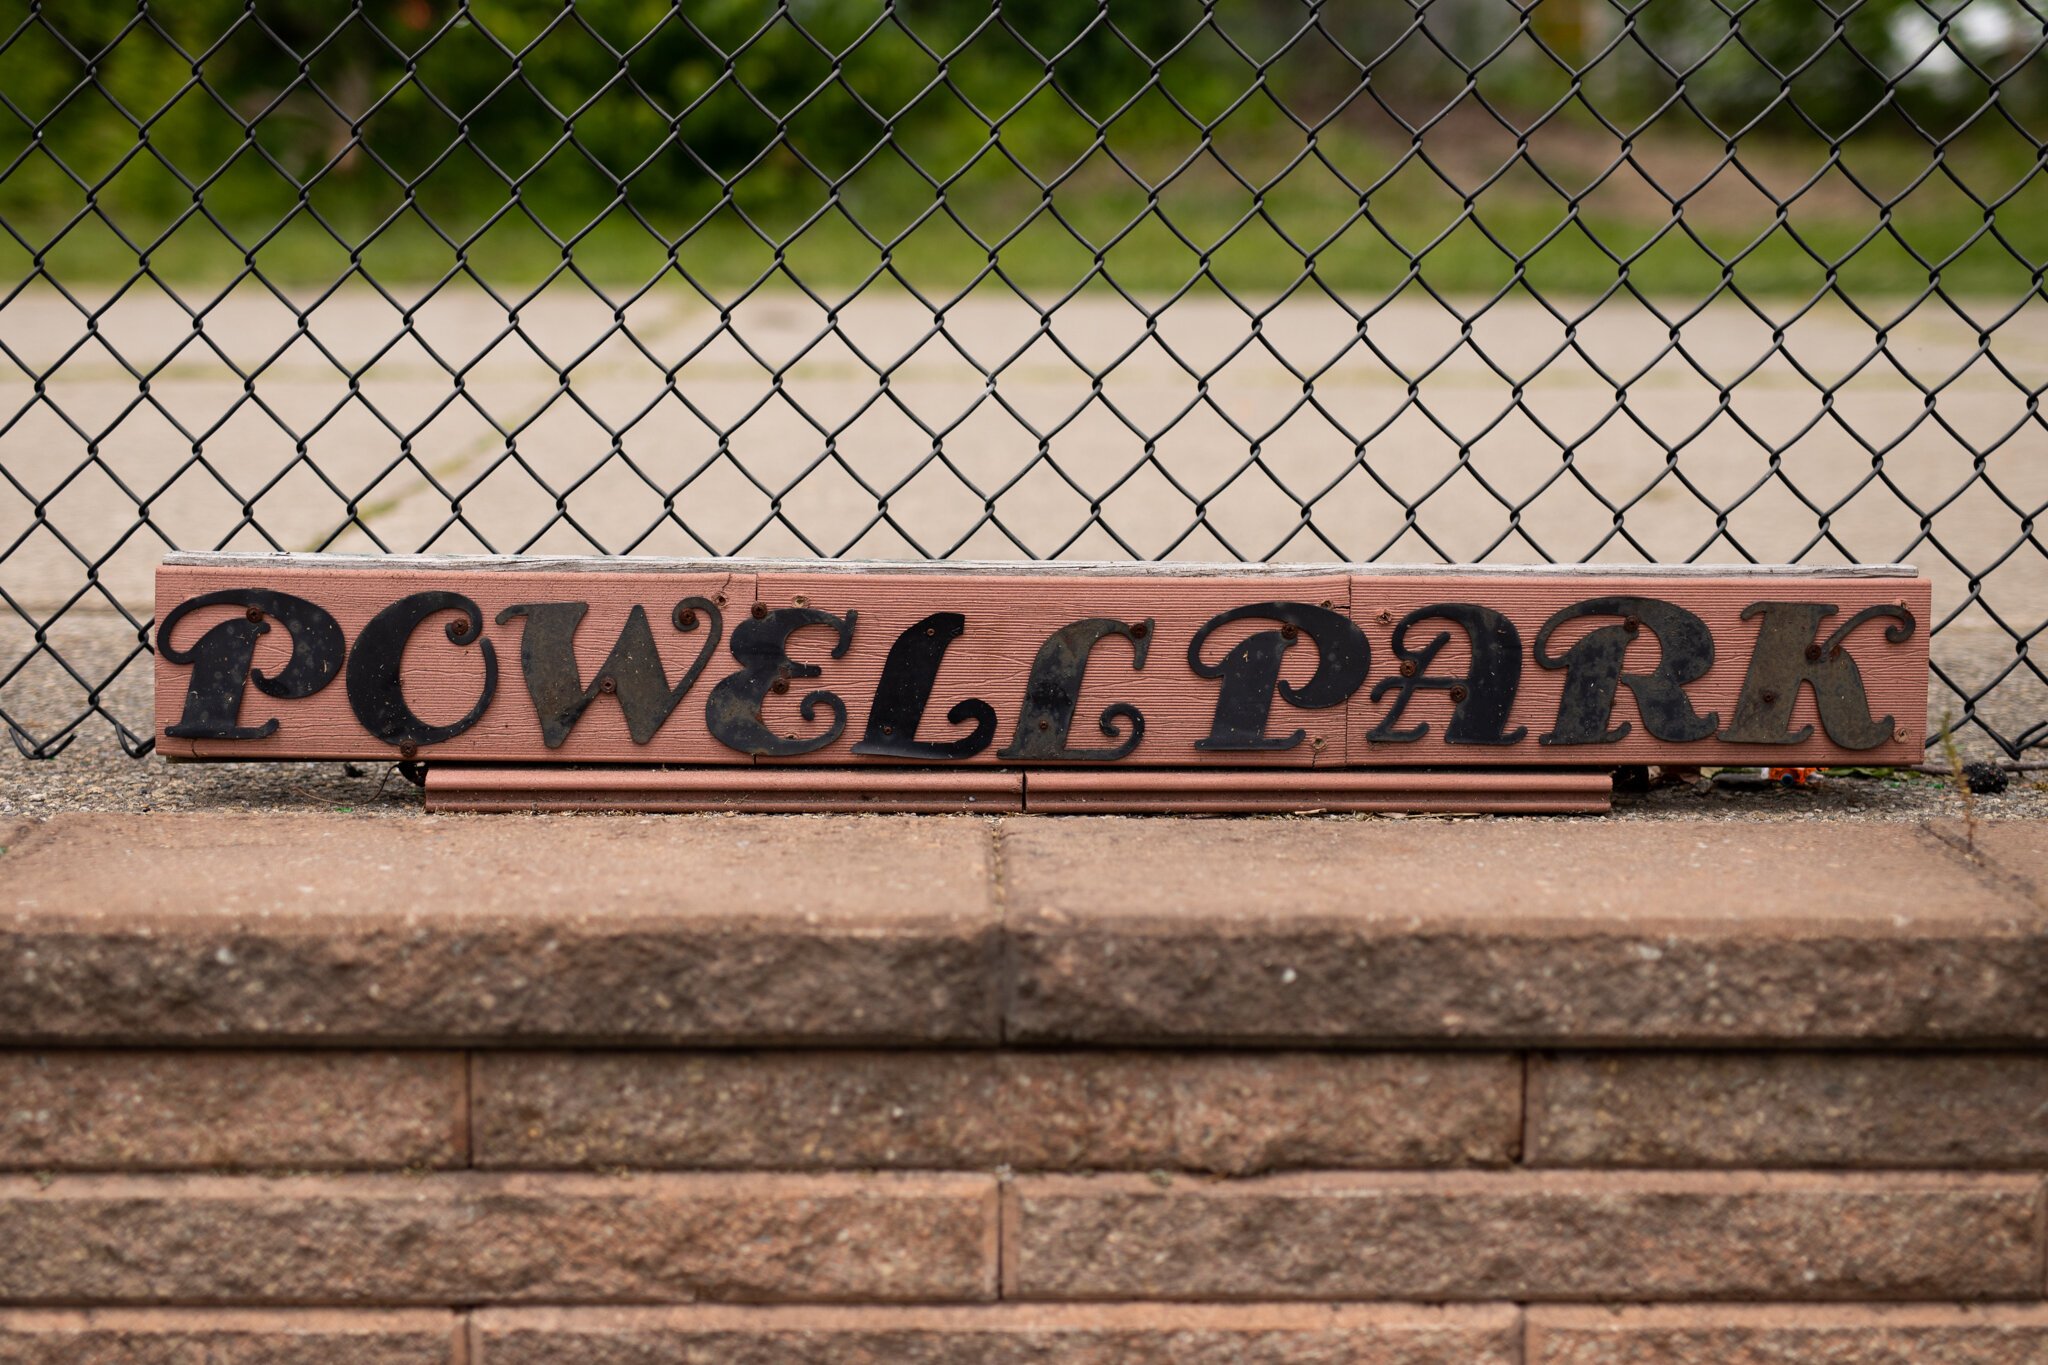 Powell Park is located at the corner of E. Pontiac St. and Weisser Park Ave. in Fort Wayne.